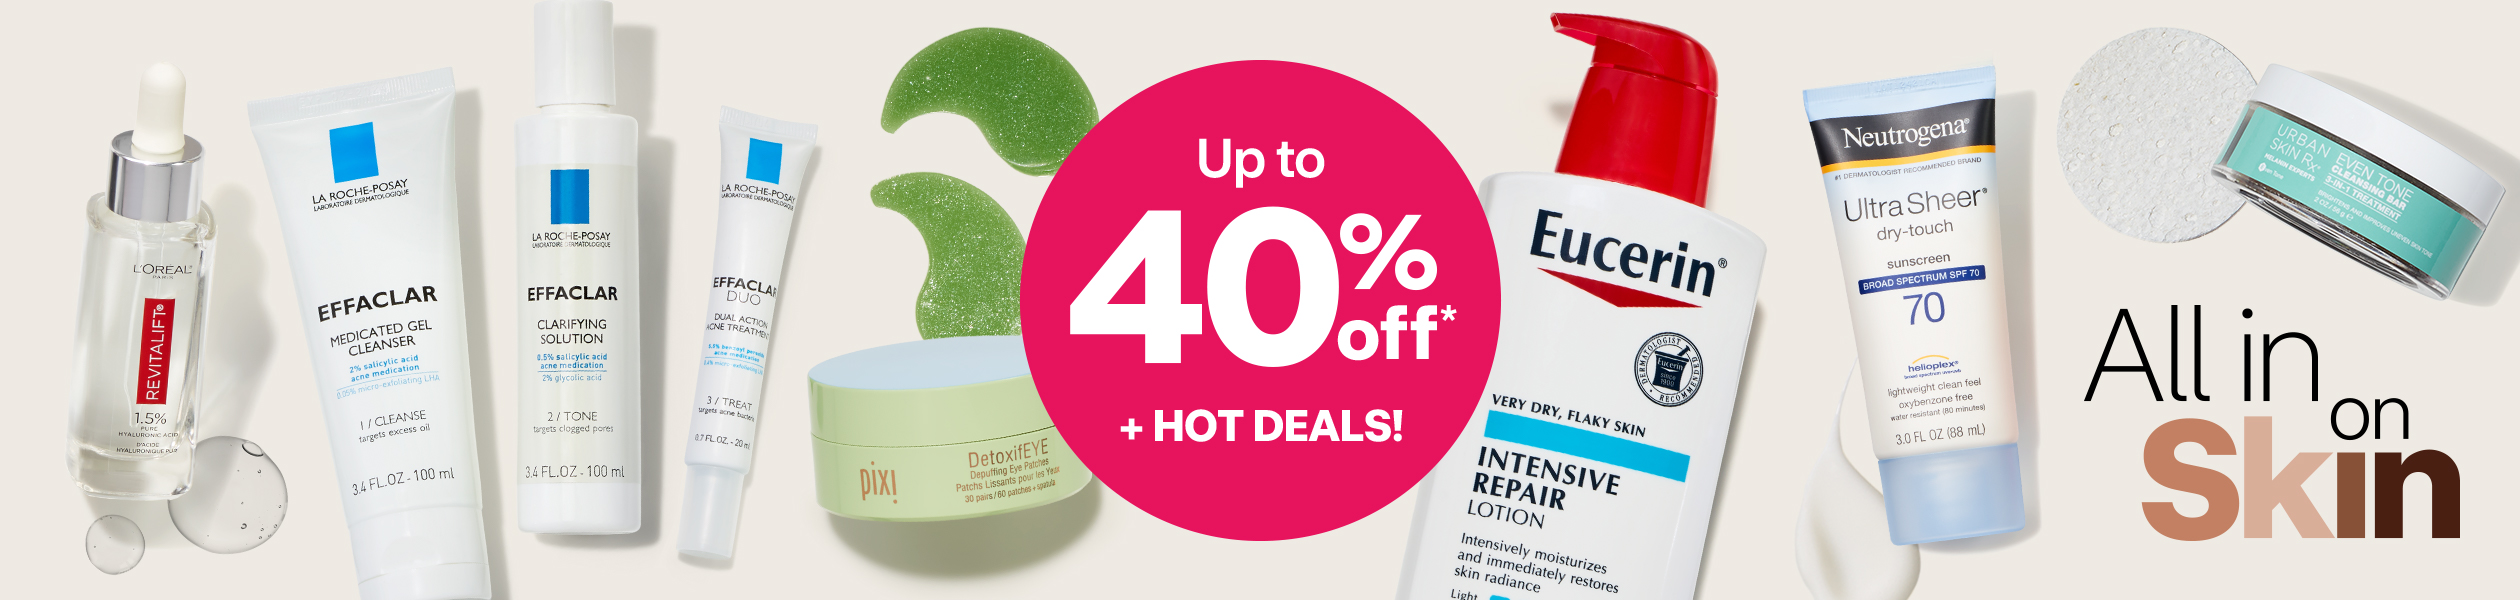 Up to 40% off plus hot deals. L’Oréal, La Roche Posay, Pixi, Eucerin, Urban Skin Rx and Neutrogena skin care products.